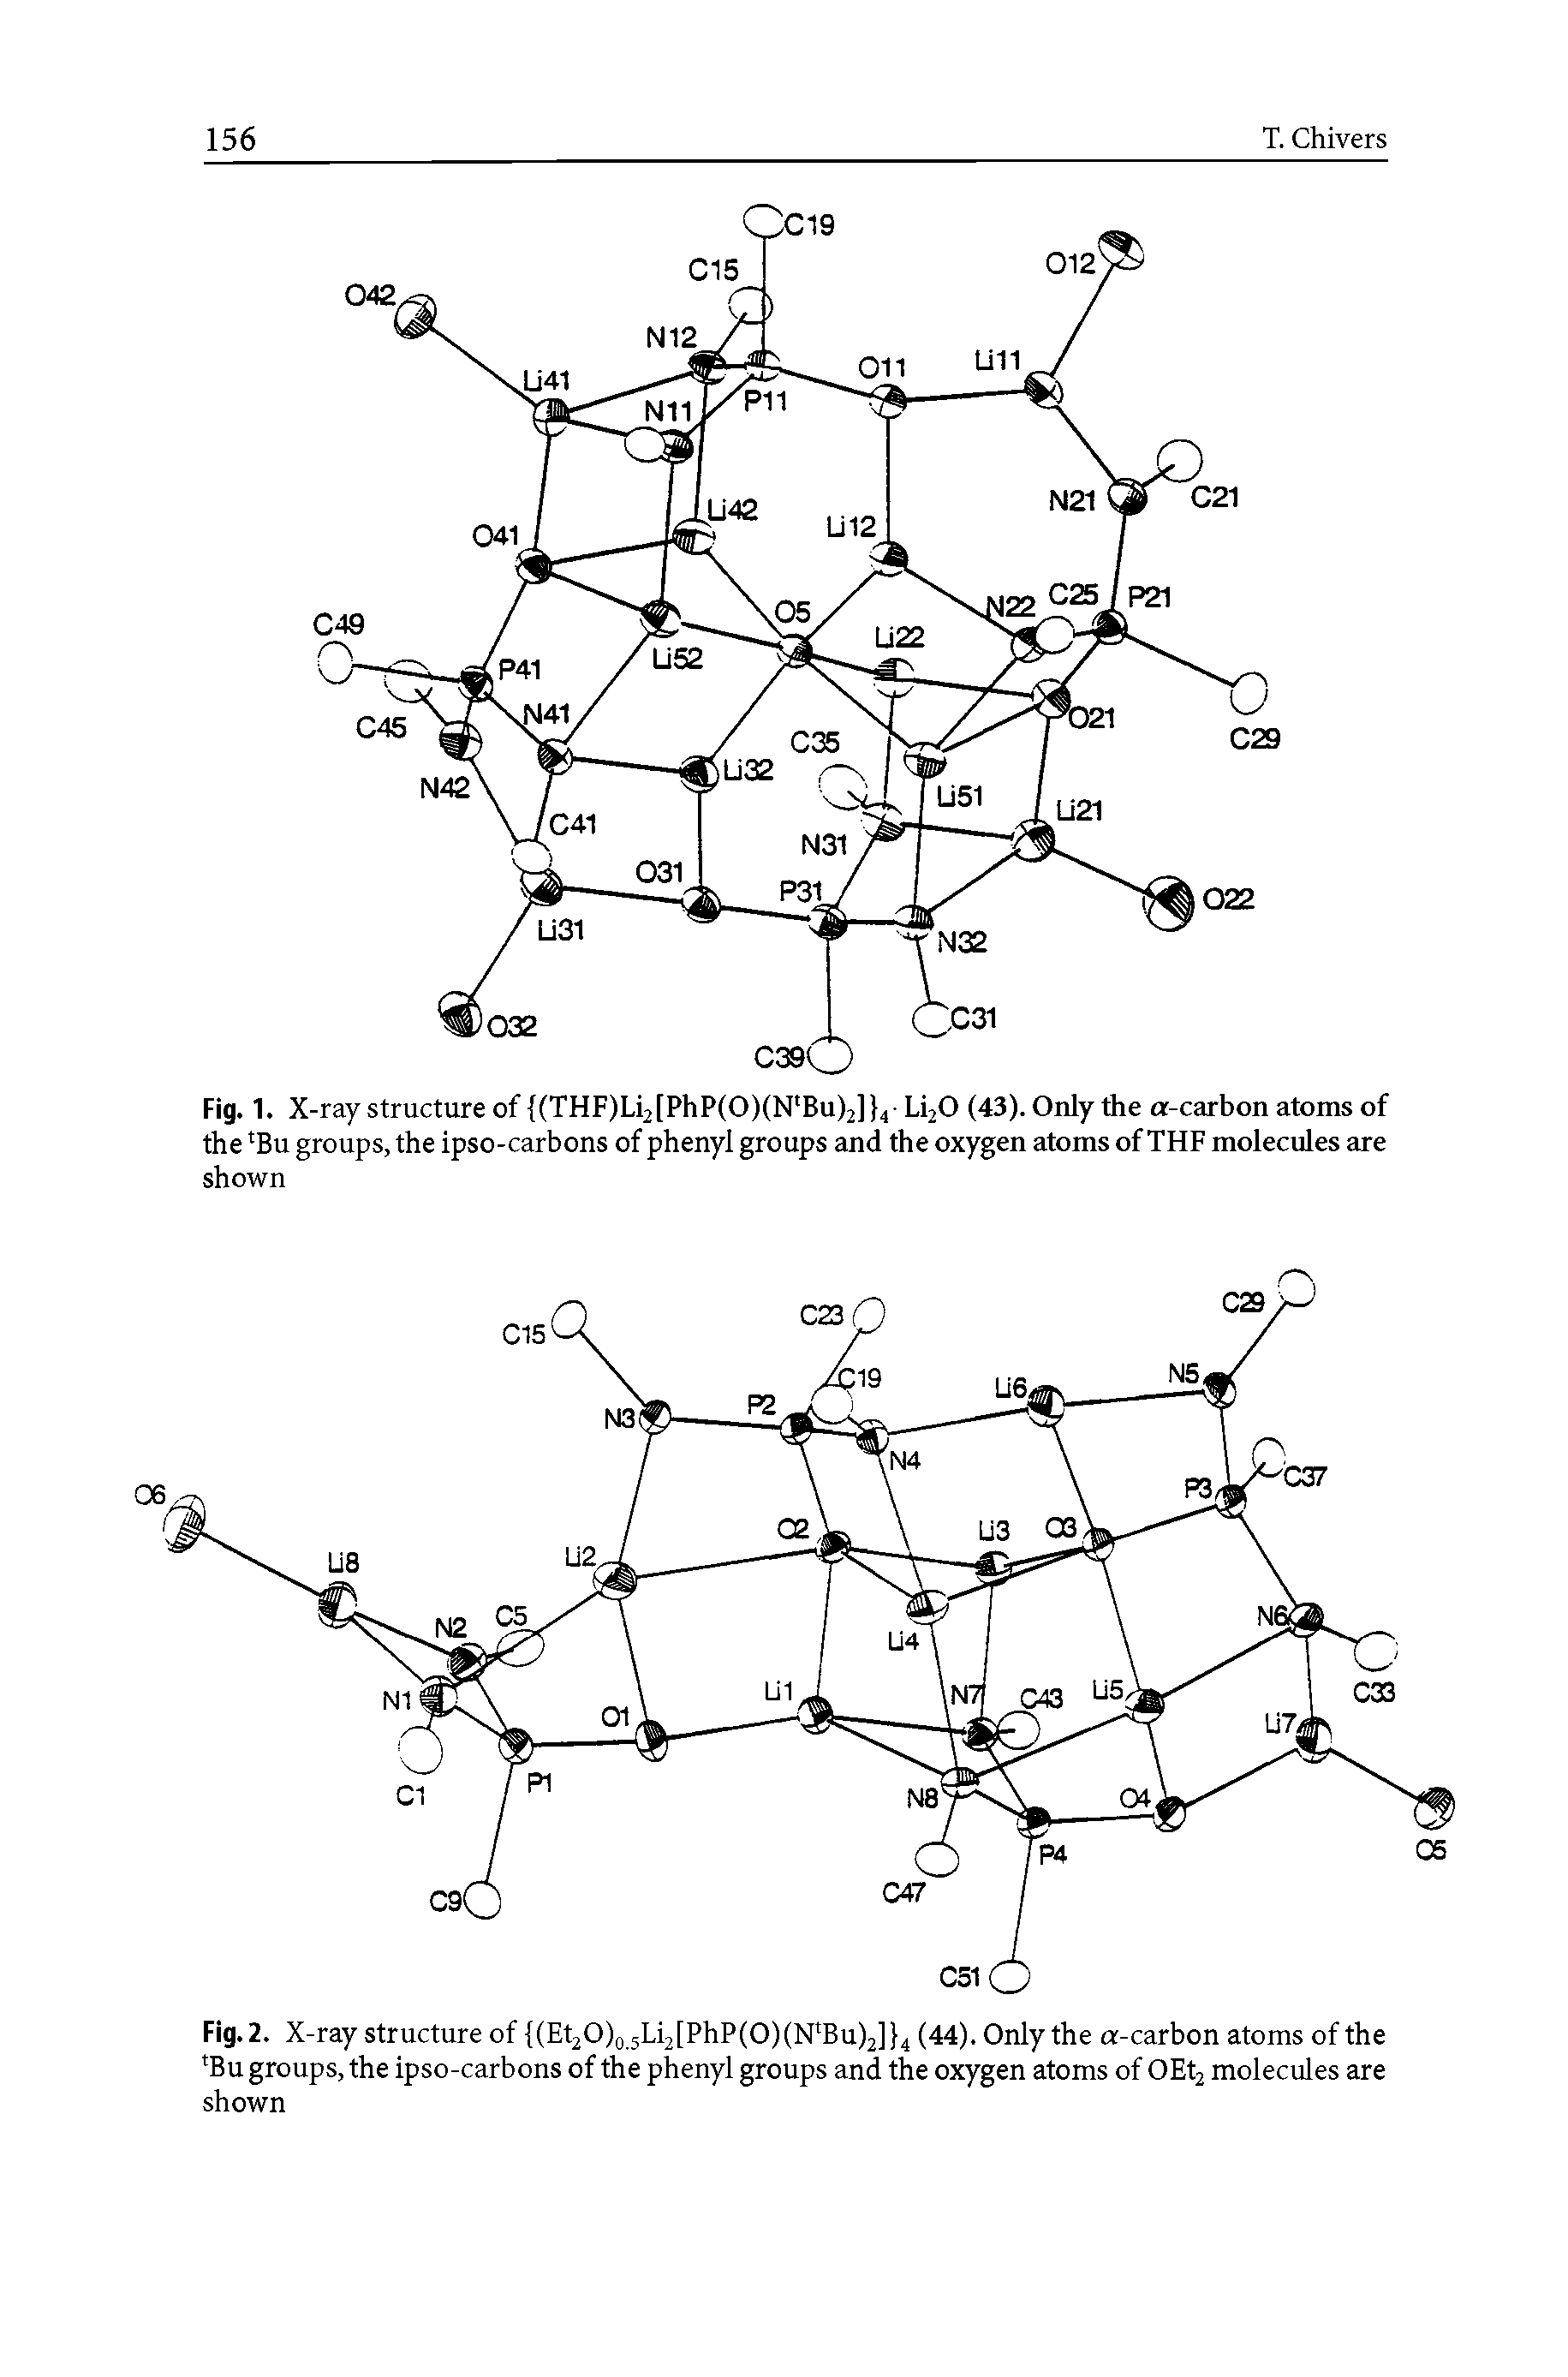 Fig. 2. X-ray structure of (Et20) 5Li2[PhP(0)(N Bu)2] 4 (44). Only the a-carbon atoms of the Bu groups, the ipso-carbons of the phenyl groups and the oxygen atoms of OEt2 molecules are shown...